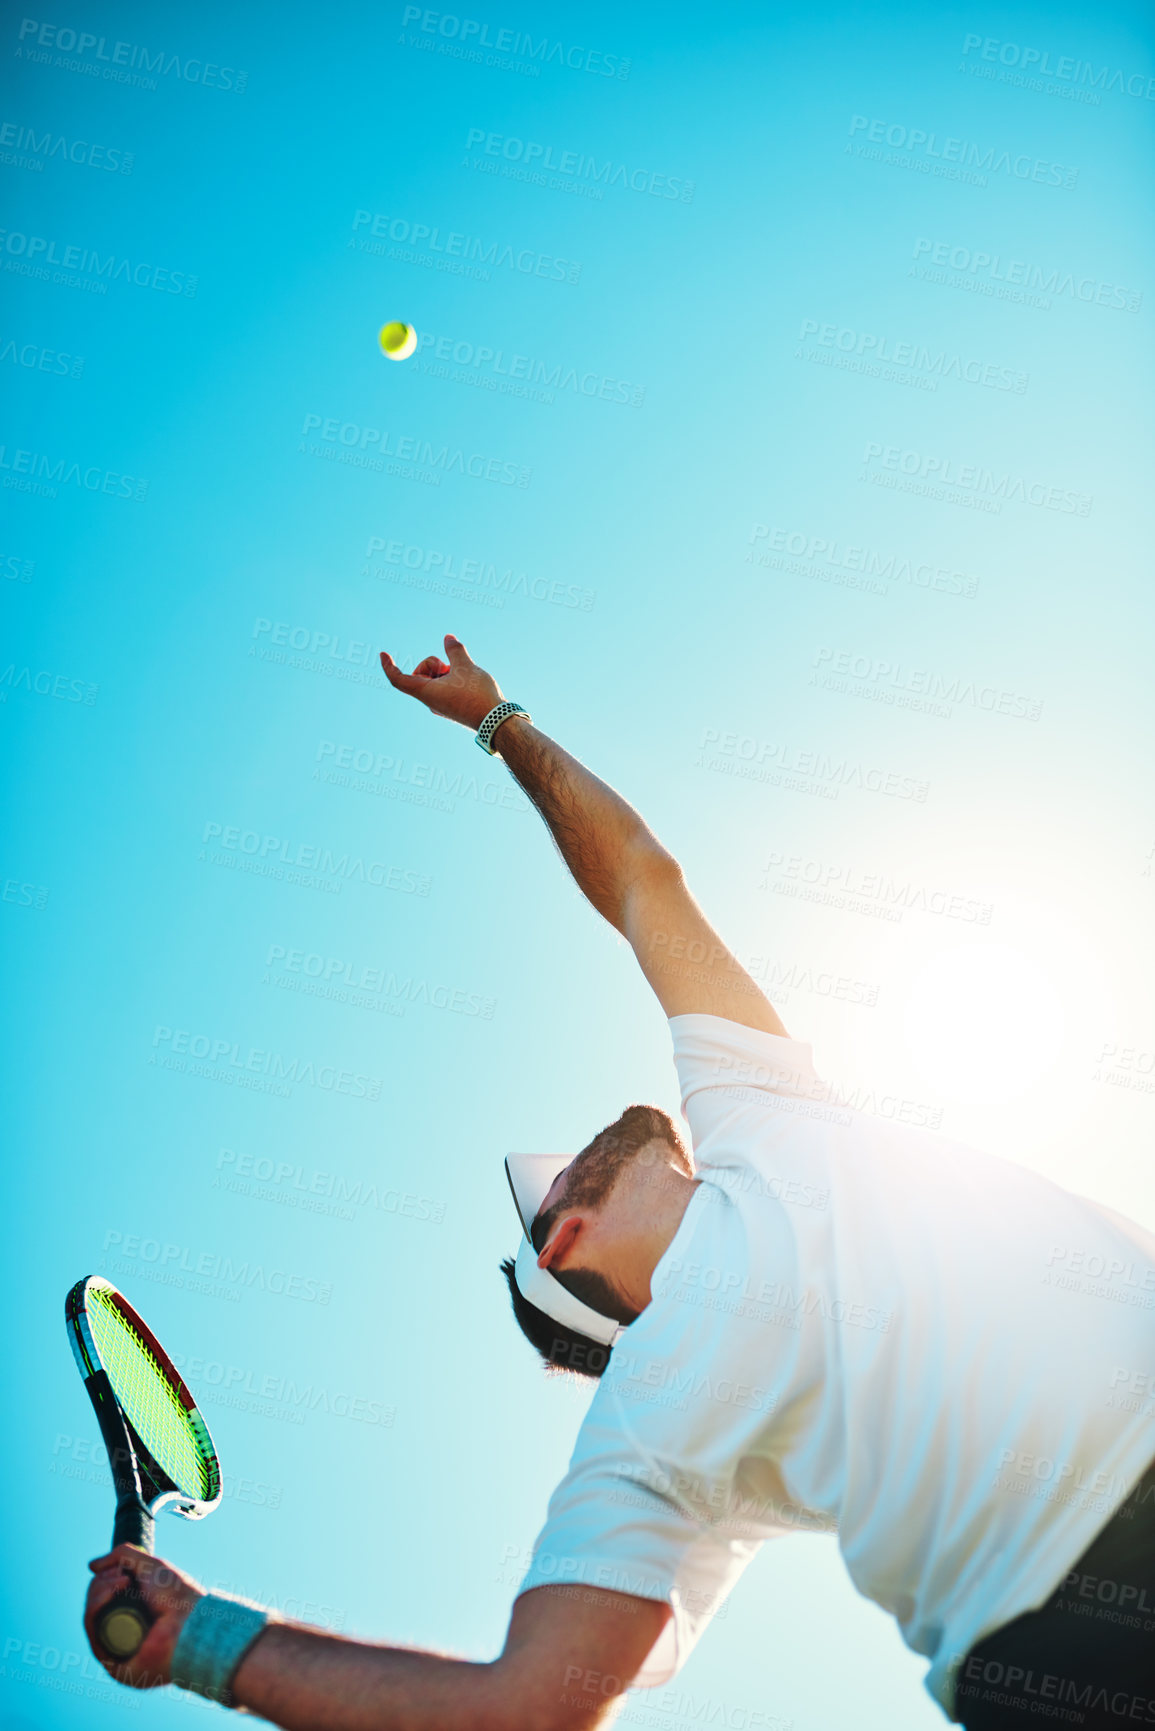 Buy stock photo Low angle shot of a sporty young man playing tennis